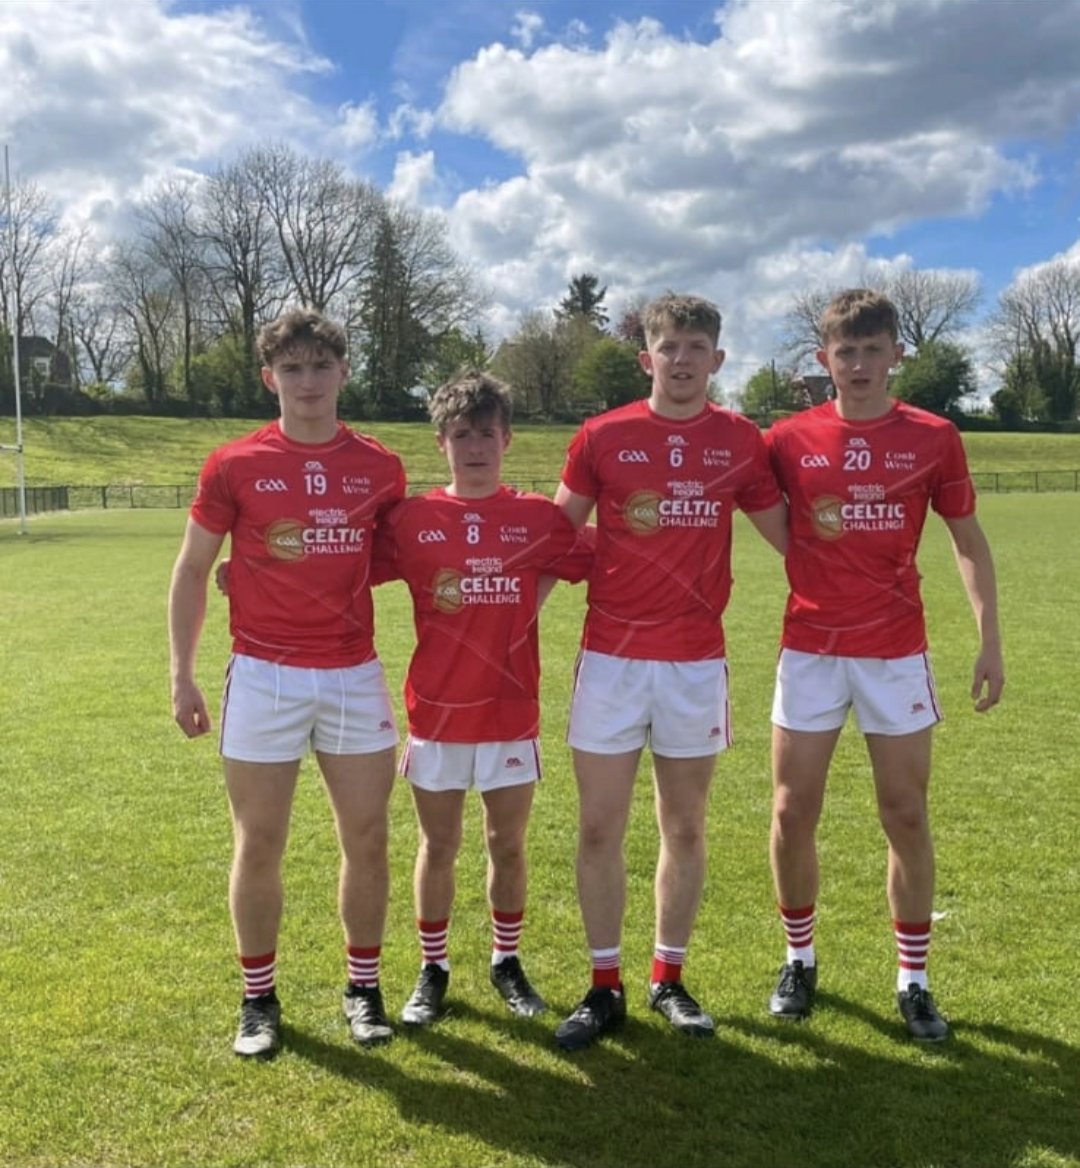 Best of luck to TY students Olan Murphy, Liam Dooley, Michael O Donovan and Jason Murray who play for Cork West in the Celtic Challenge All Ireland quarter Final tomorrow.